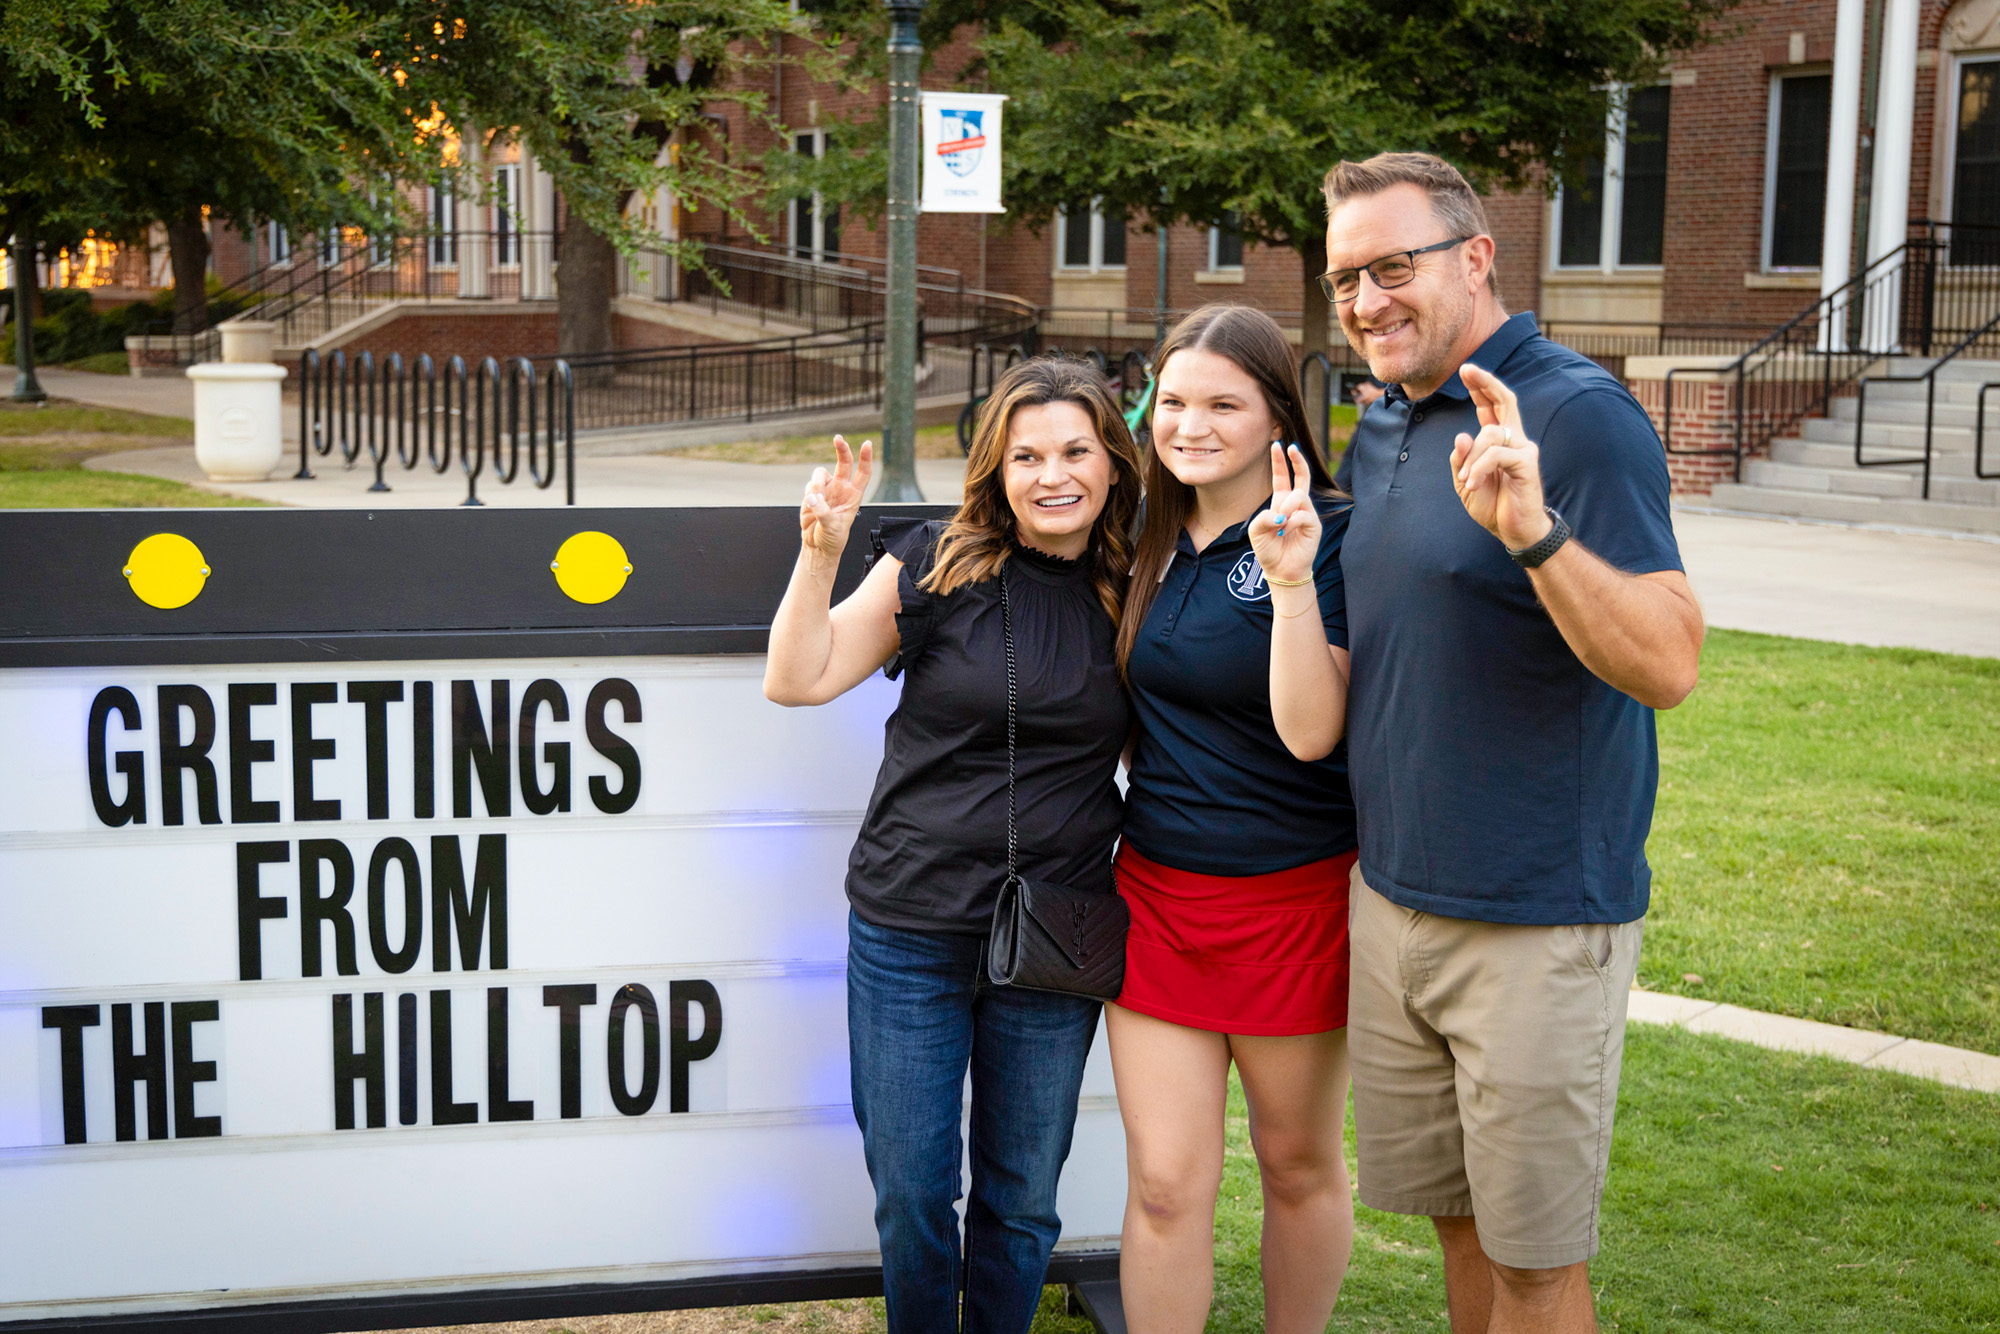 Parents and Students at Family Weekend 2023 in front of marquee sign "Greetings from the Hilltop"